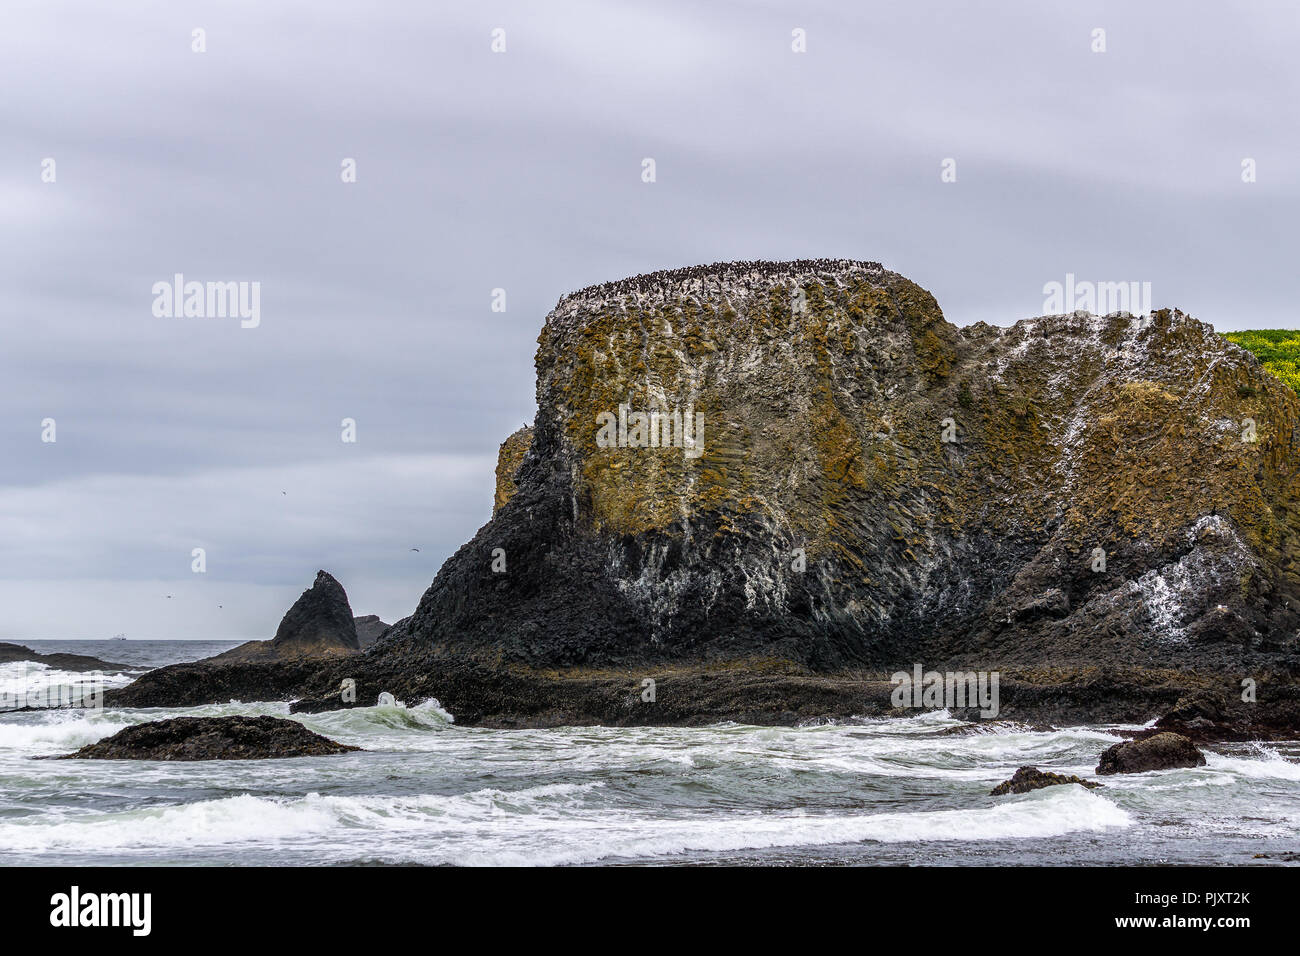 Birds or Cormorants colony on a rocky basaltic cliff or headland in Yaquina Head Outstanding Natural Area State Park, Oregon Coast, Newport, USA. Stock Photo